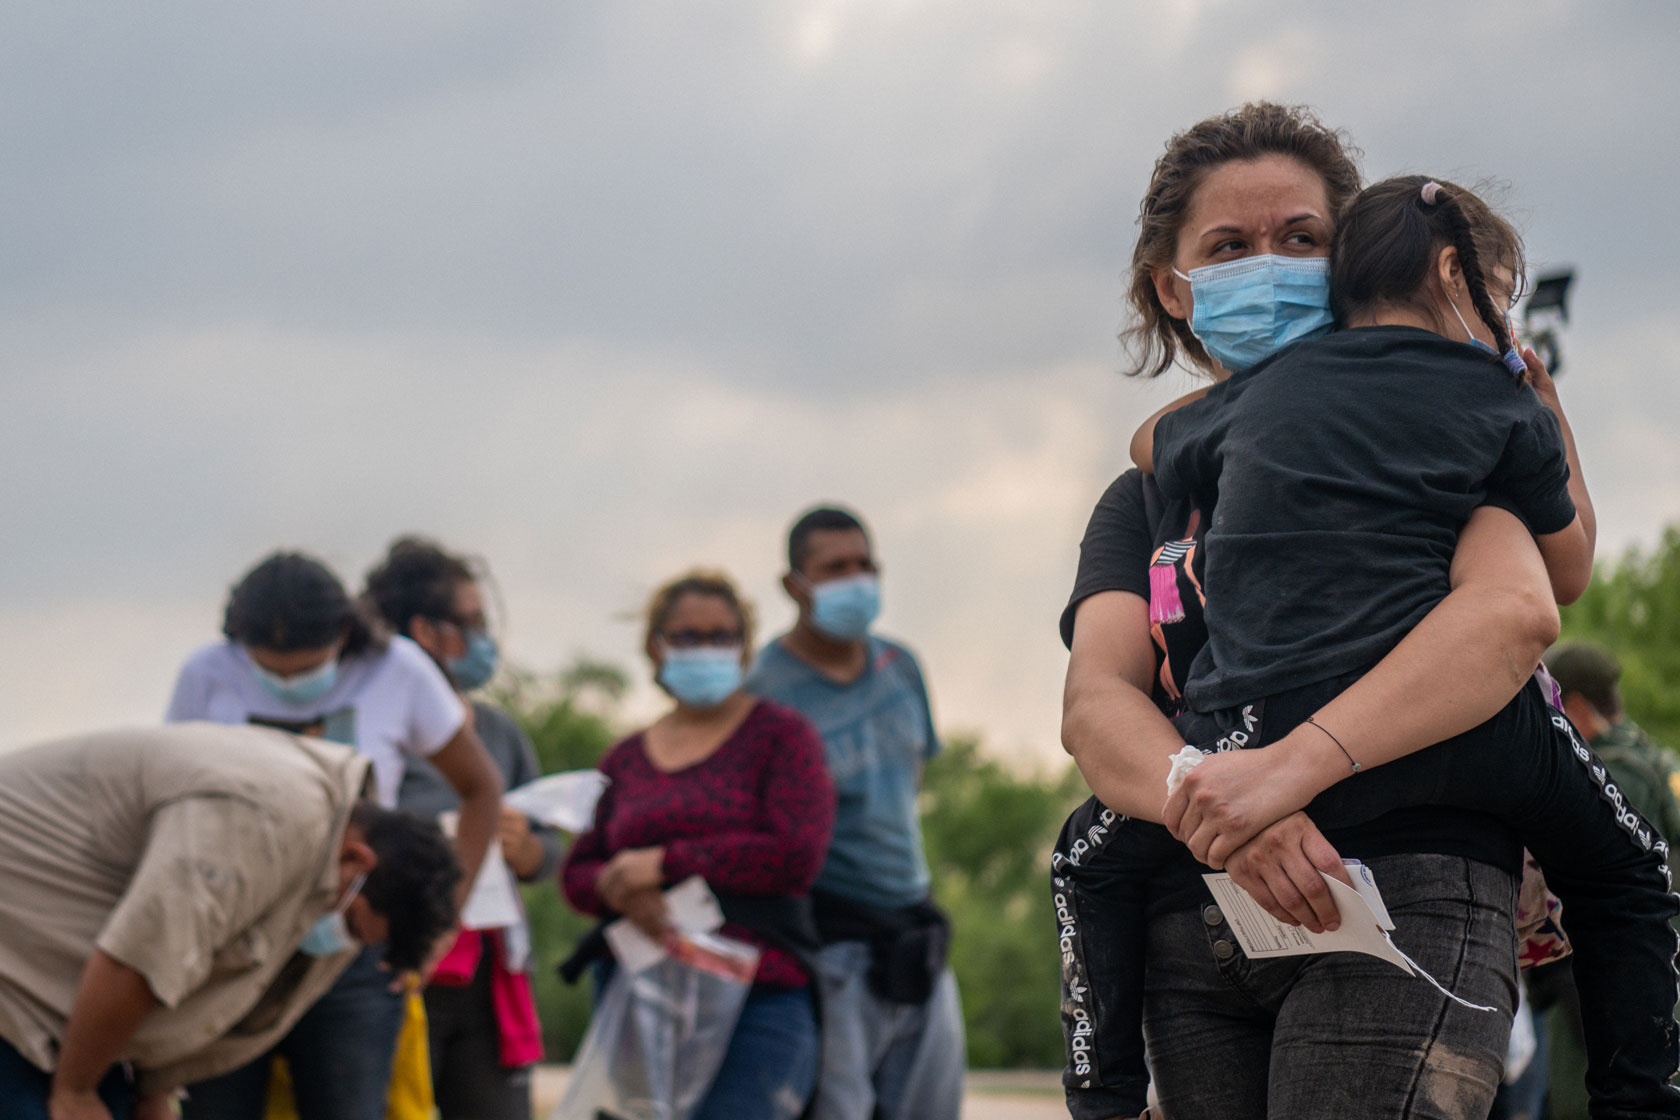 Photo shows a mother carrying her young daughter, surrounded by other individuals wearing face masks.